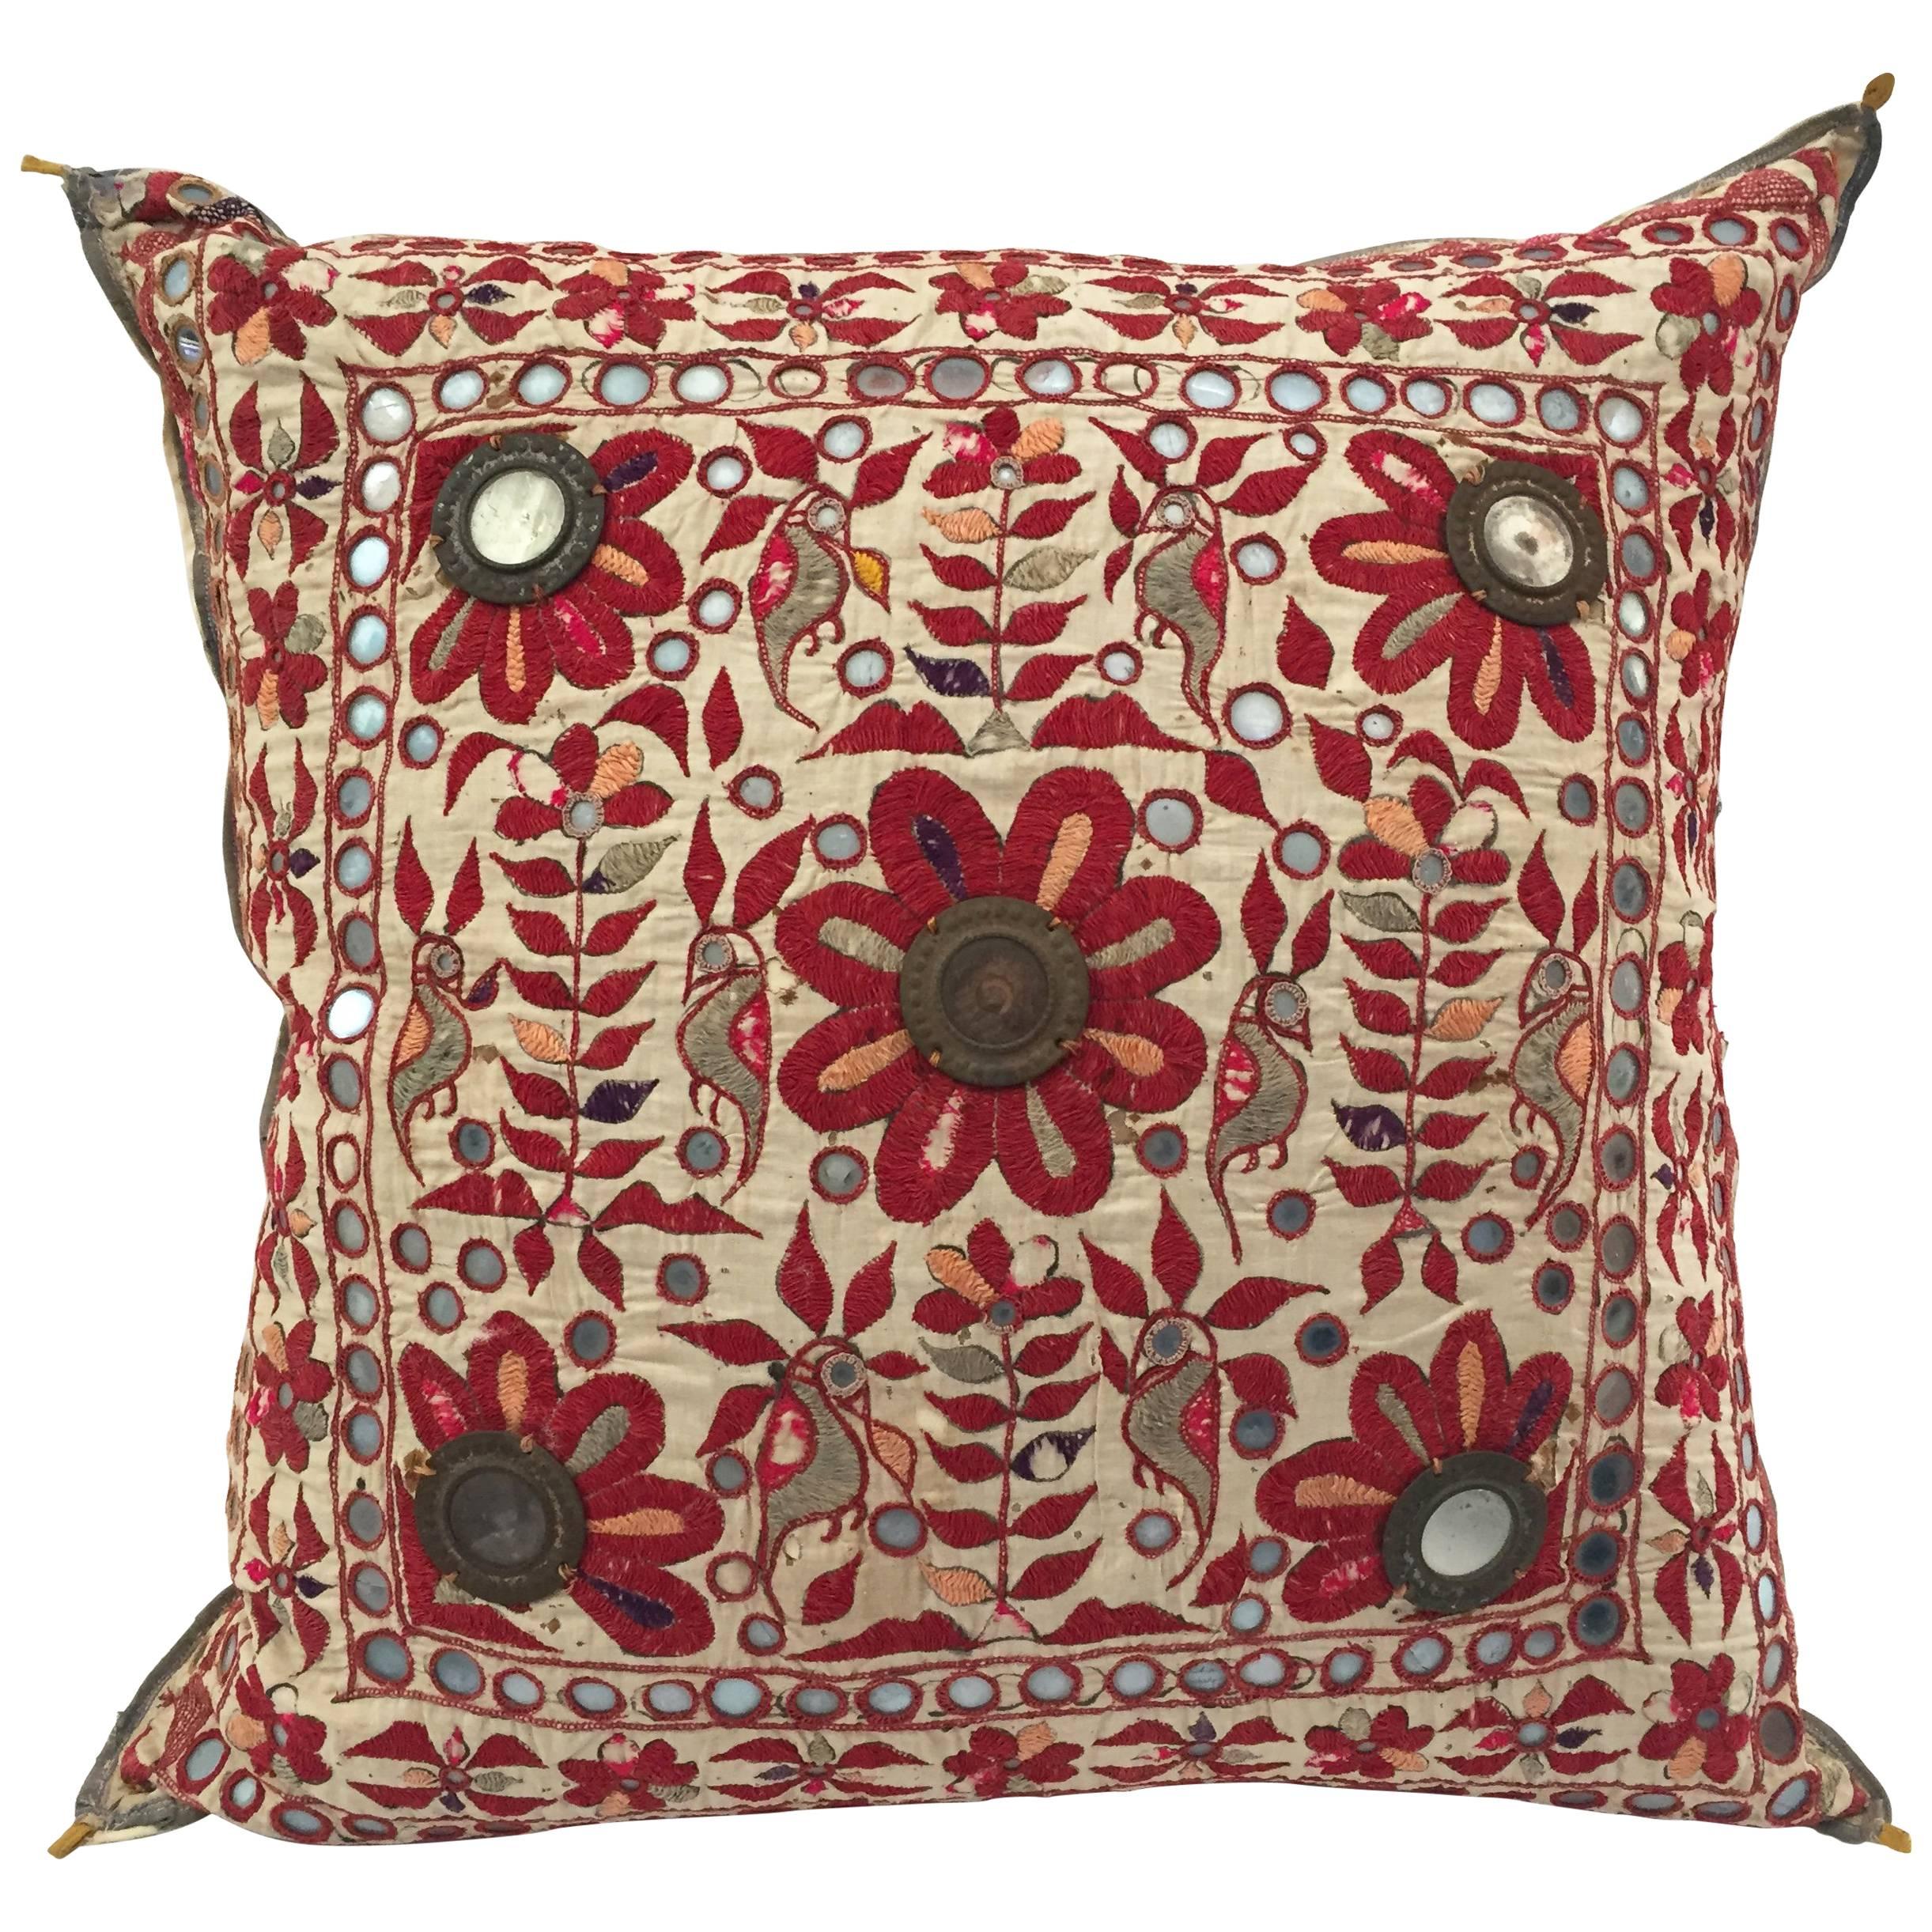 19th Century, Rajasthani Colorful Embroidery and Mirrored Decorative Pillow For Sale